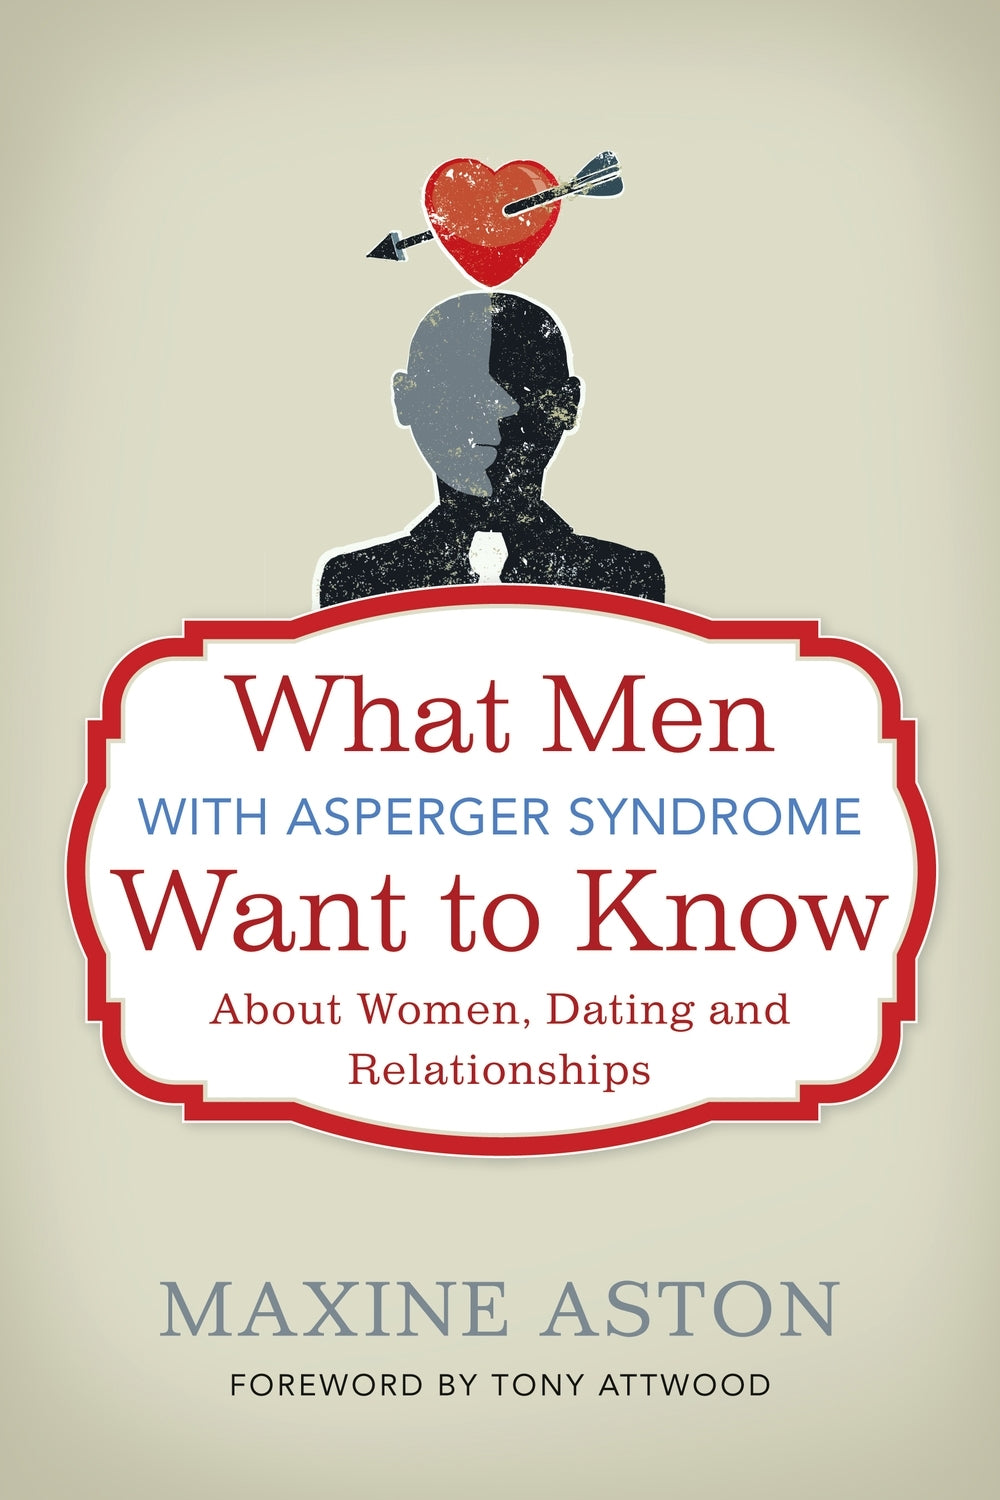 What Men with Asperger Syndrome Want to Know About Women, Dating and Relationships by Dr Anthony Attwood, Maxine Aston